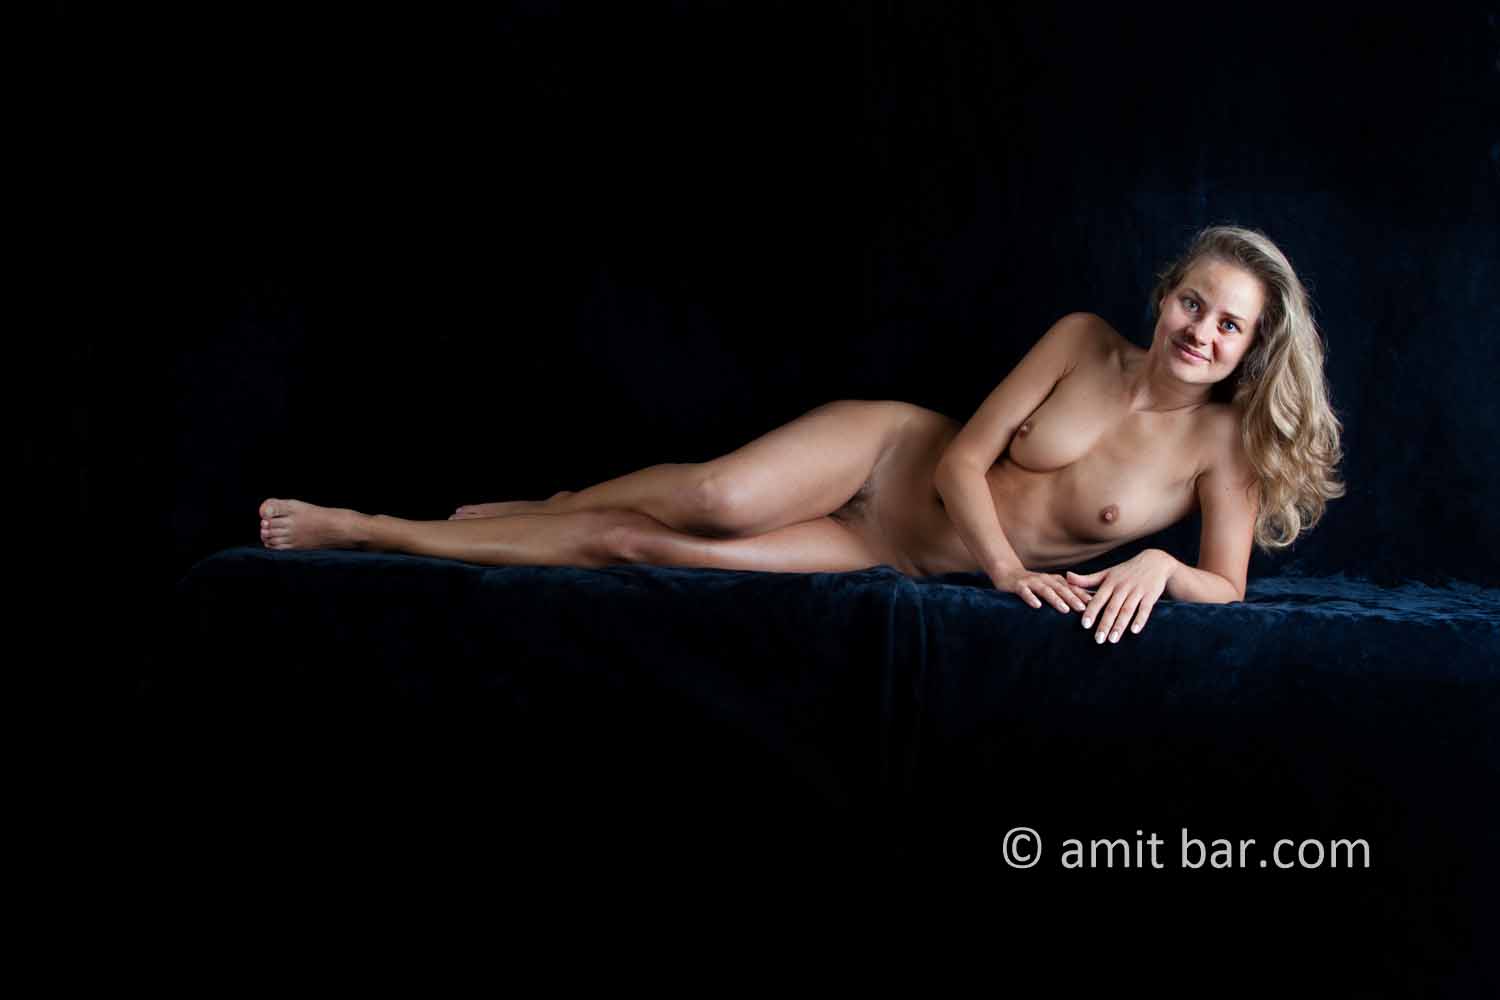 Leaning on elbow: Nude model leaning on elbow